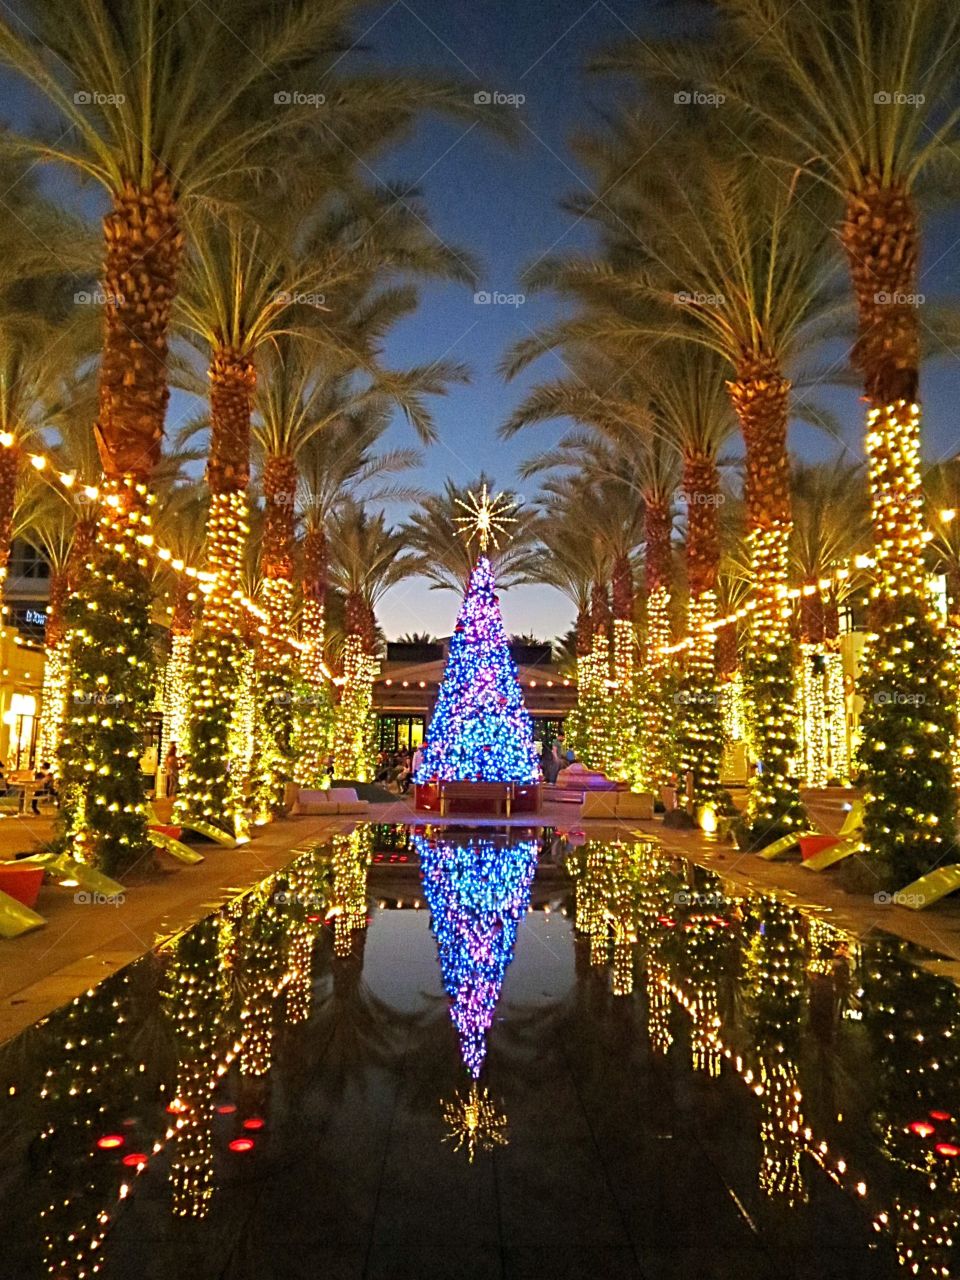 Dazzling holiday lights, Christmas tree, palm trees and water.